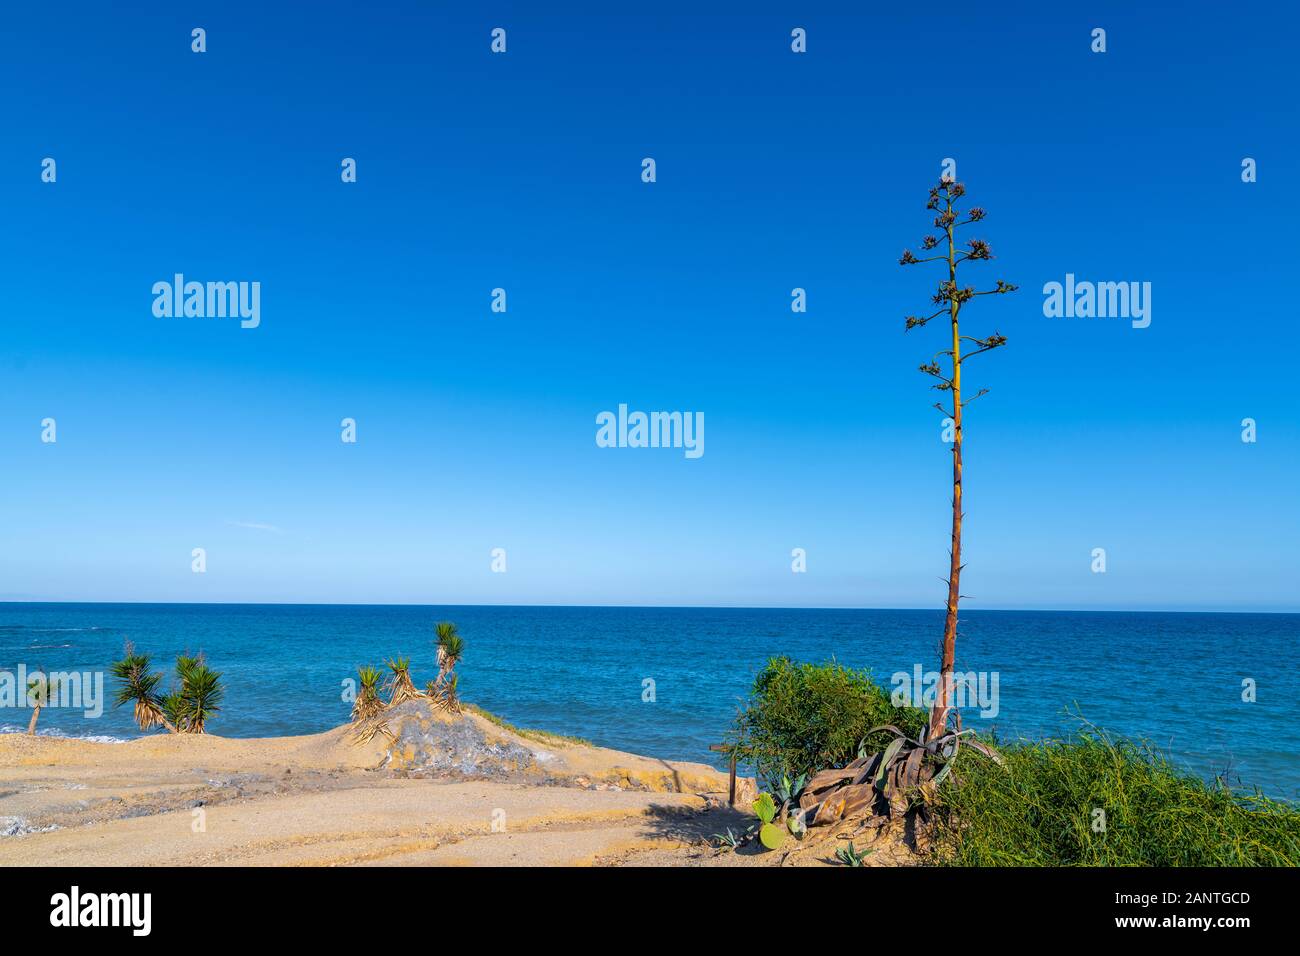 Almeria, typical tourist image with the pita or agave plant and the sea in the background, all blue, brown and green. Stock Photo